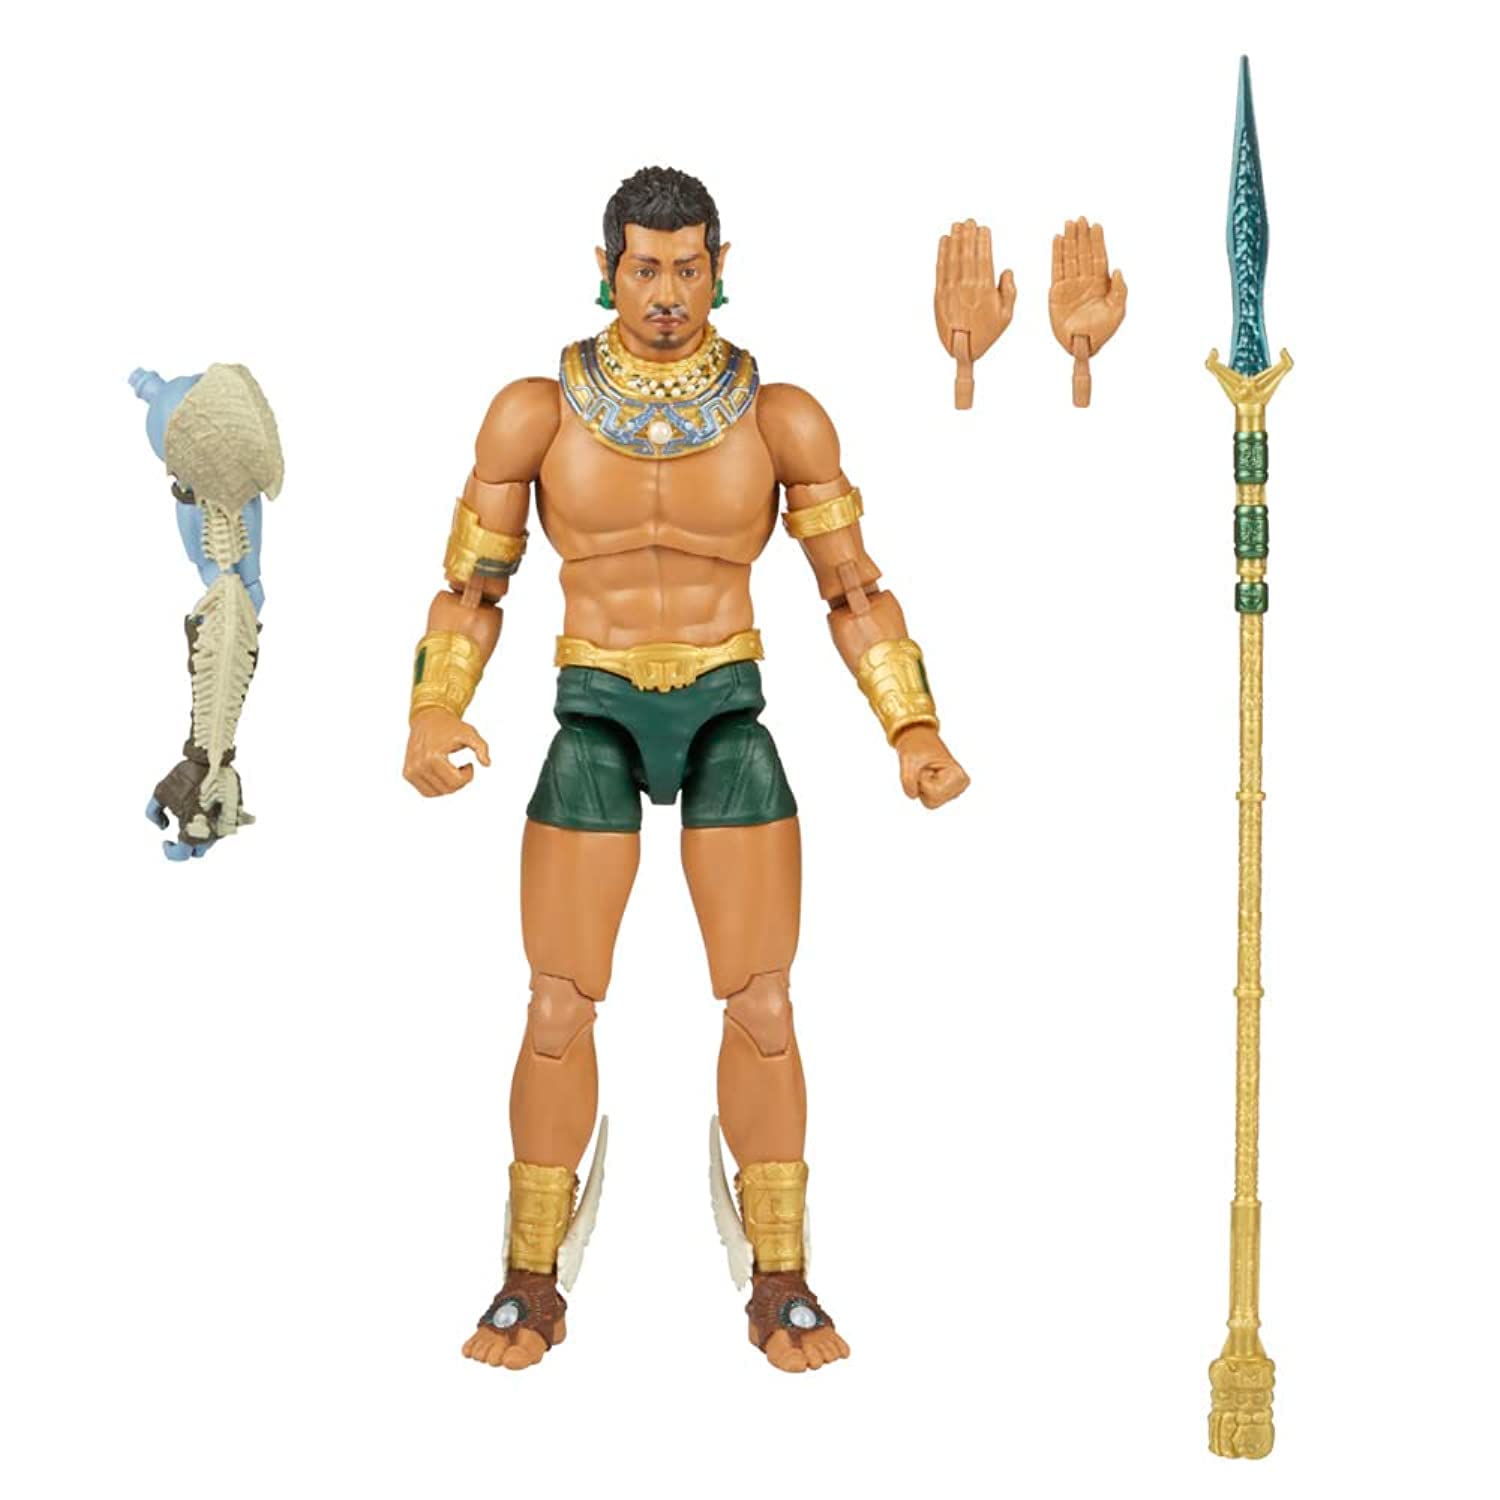 Marvel Legends Series Black Panther Wakanda Forever Namor 6-inch MCU Action Figure Toy, 3 Accessories, 1 Build-A-Figure Part